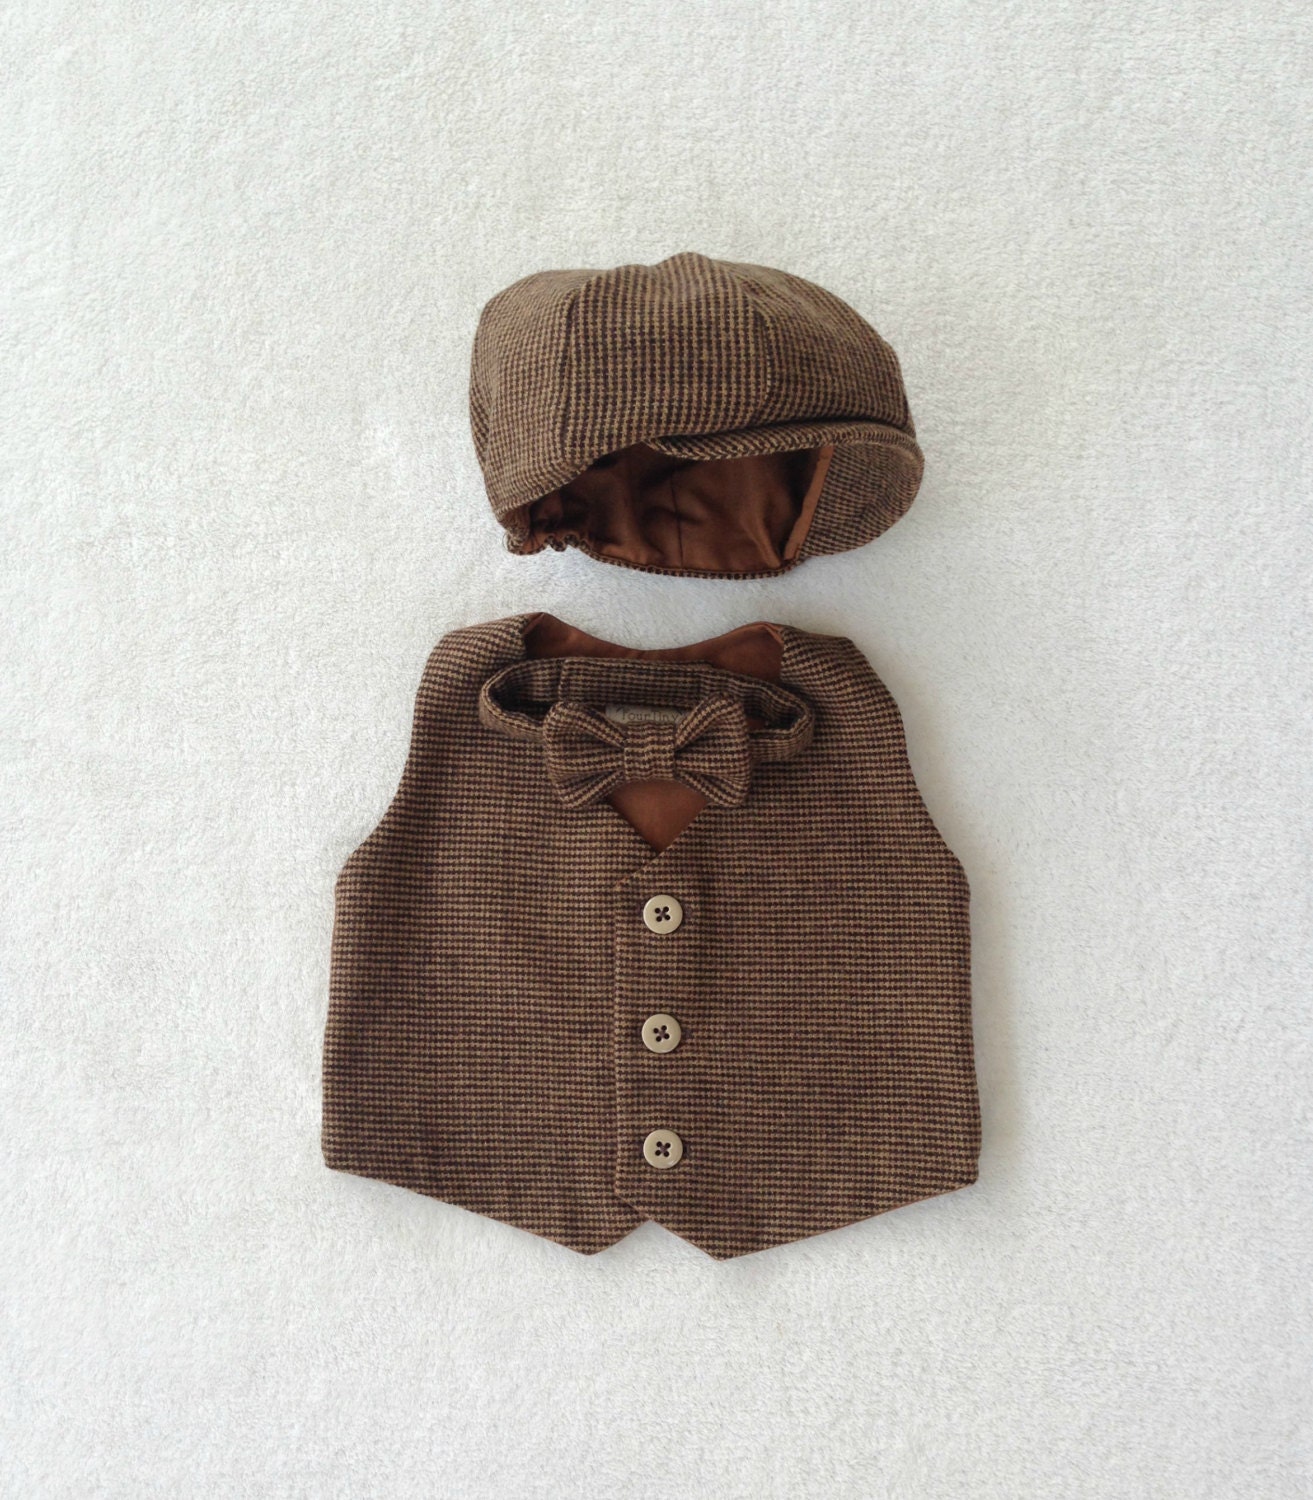 Tweed Outfit Tweed baby Tweed newsboy Baby boy by fourtinycousins